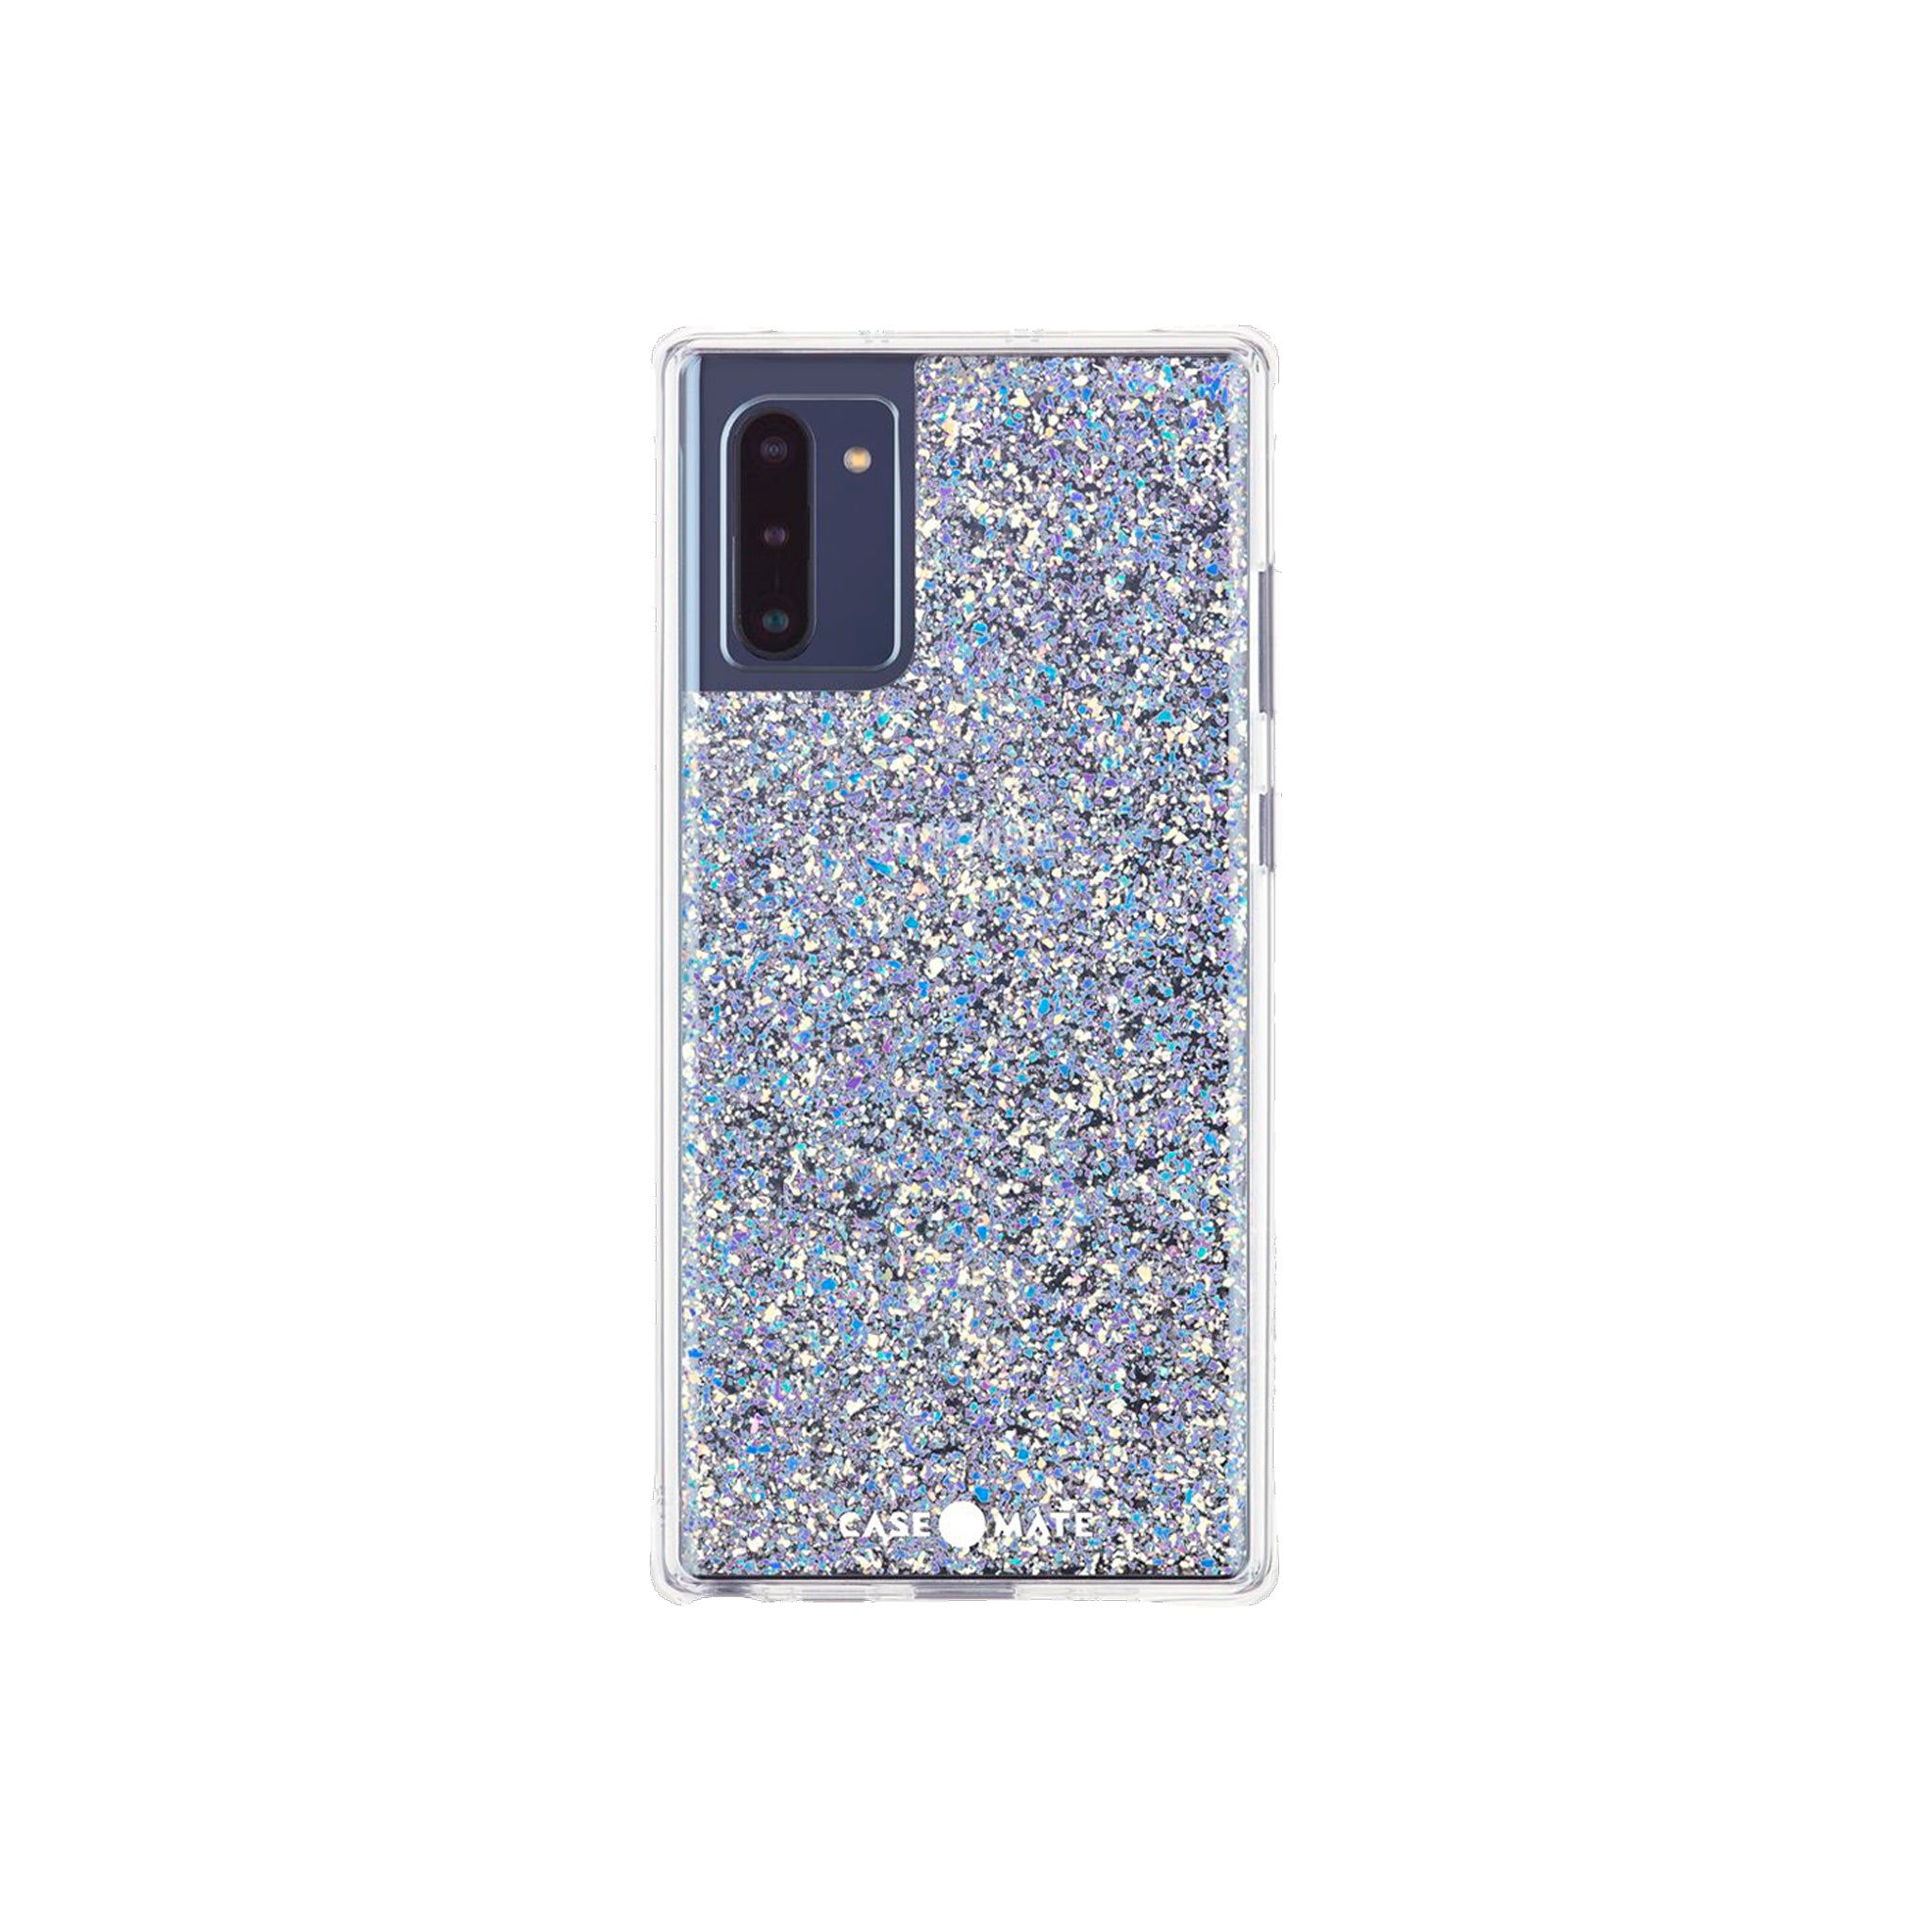 Case-mate - Twinkle Case For Samsung Galaxy Note 10 - Stardust